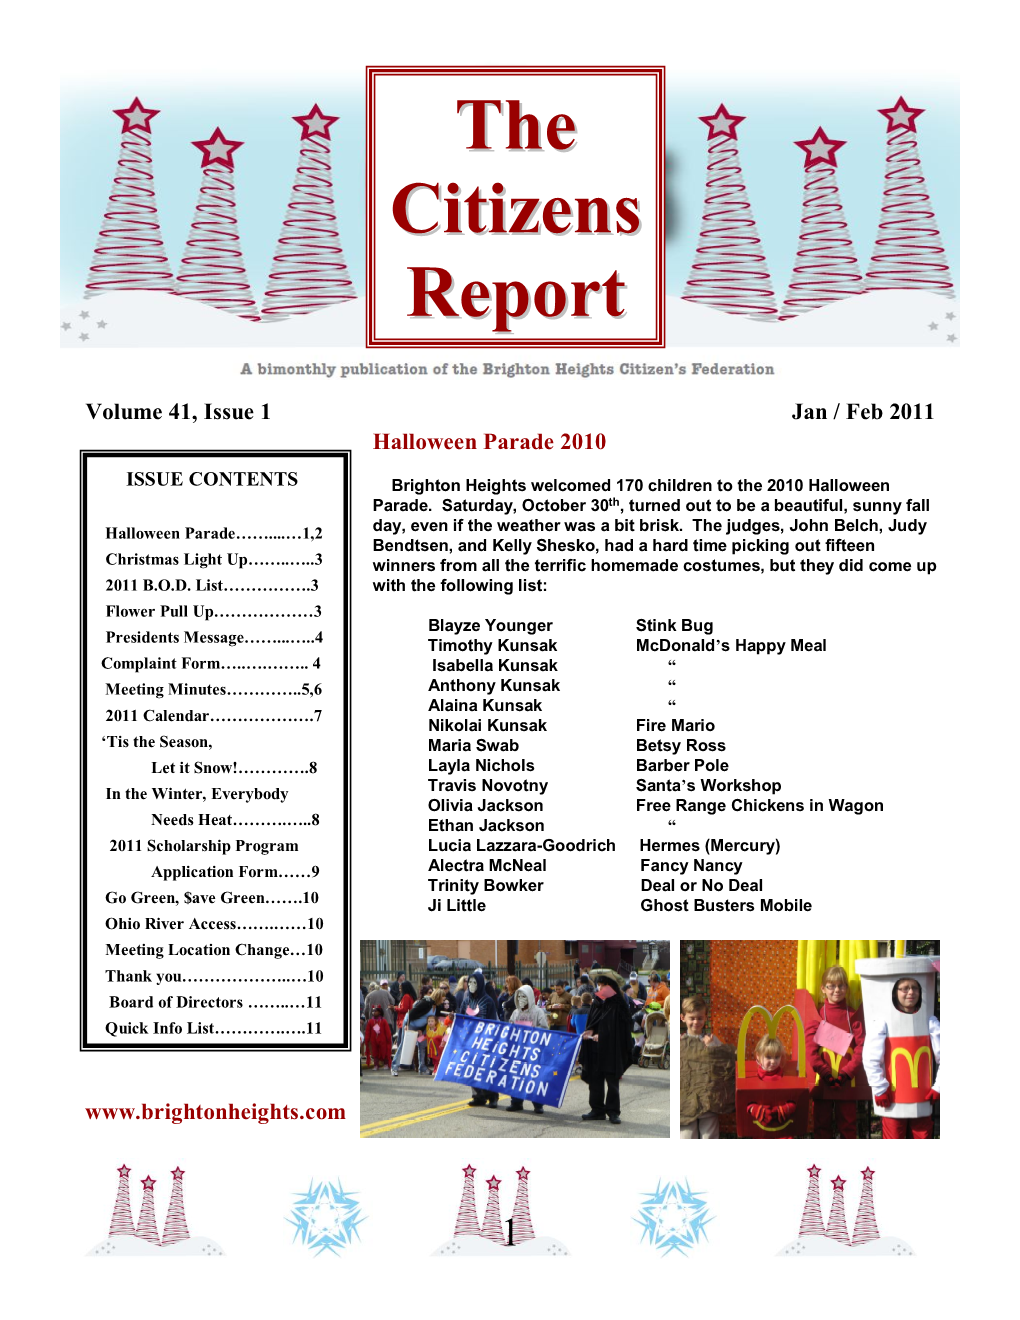 The Citizens Report